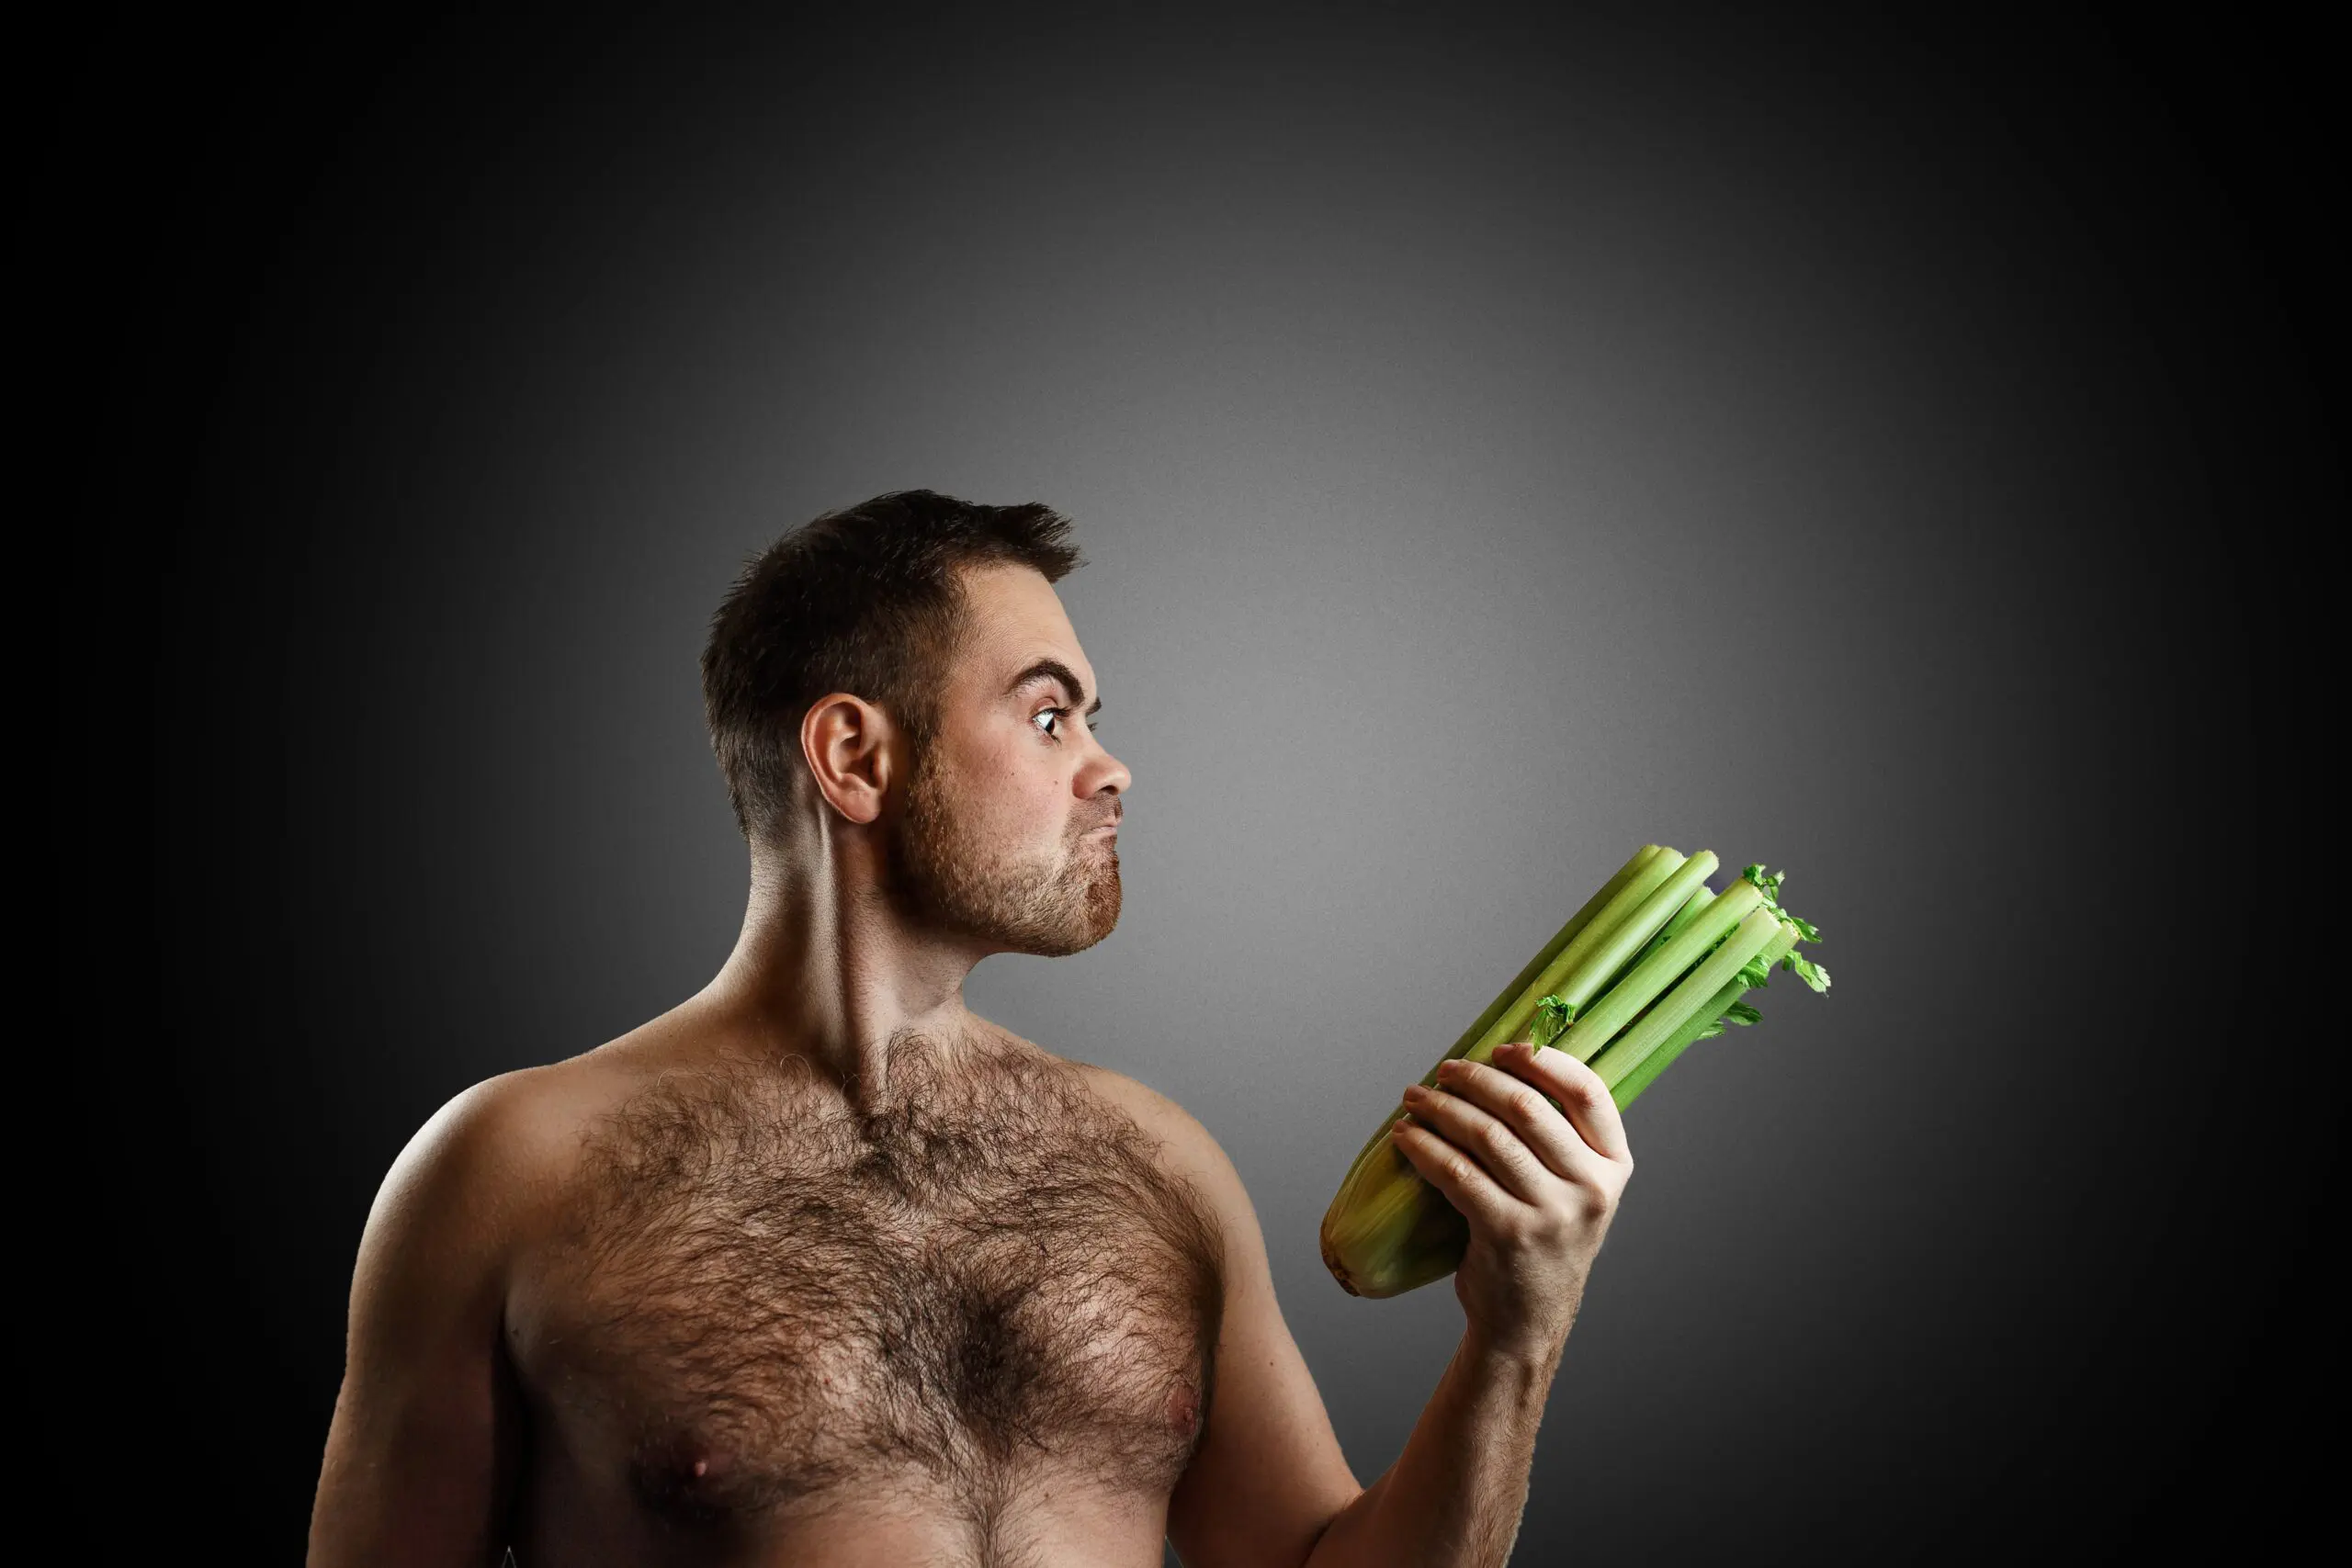 Low Fat Diets Linked To Decreased Testosterone Levels In Men